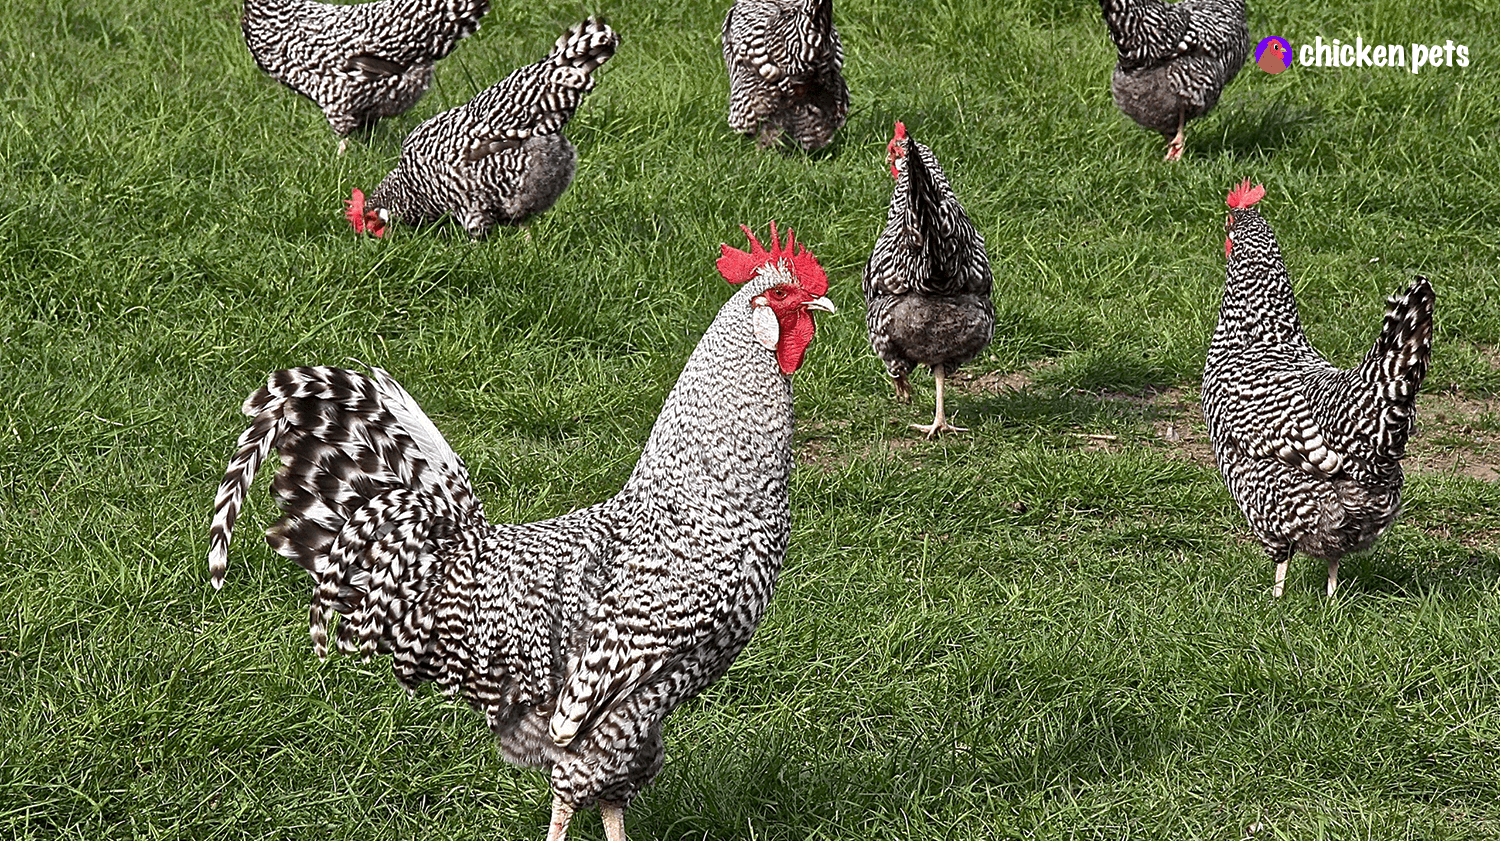 Plymouth Rock chicken hens and roosters